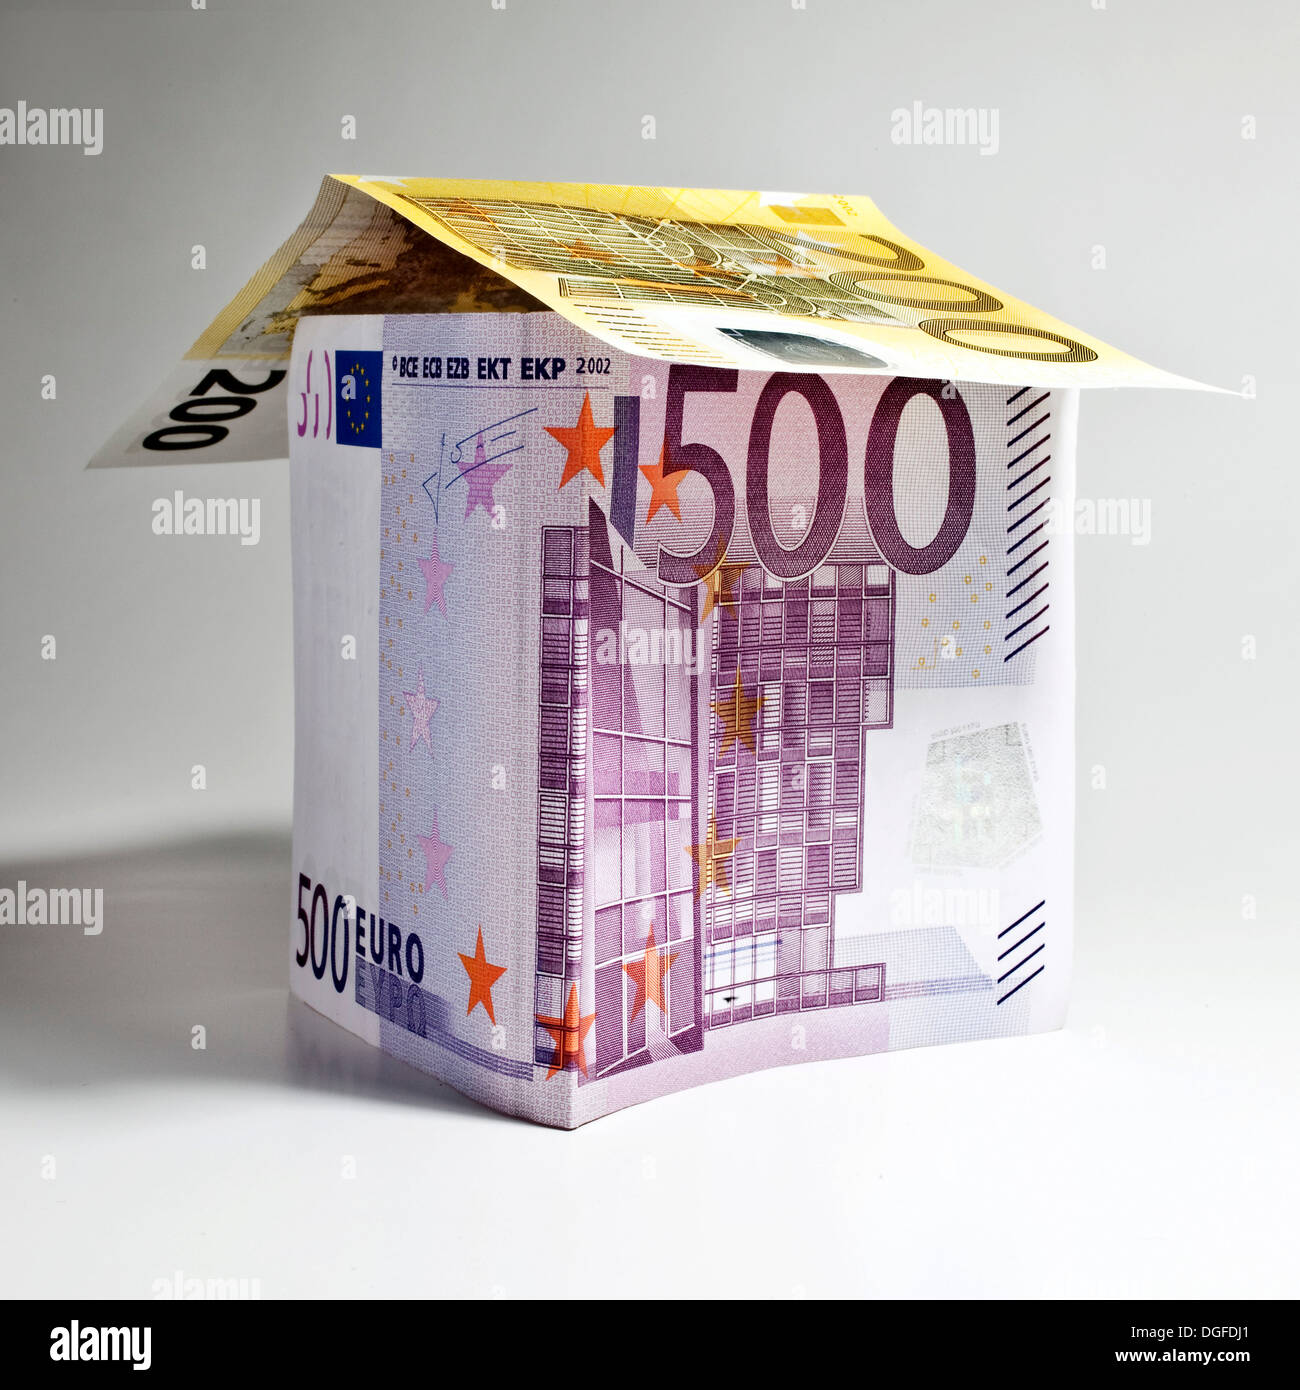 House made of euro banknotes, symbolic image for construction financing, Germany Stock Photo